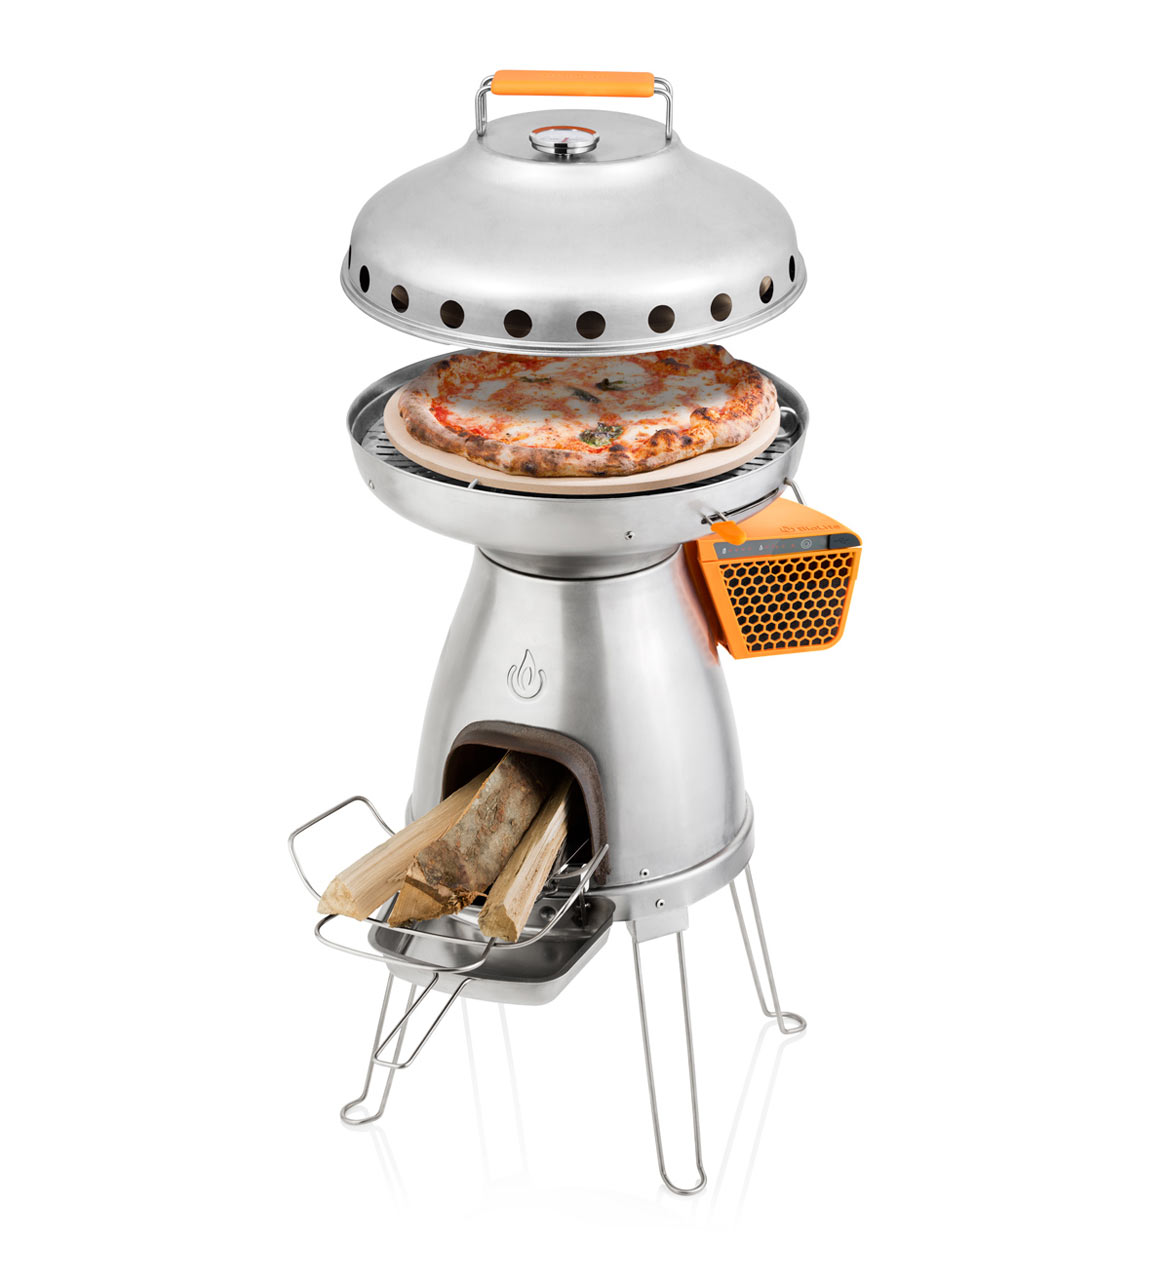 Wood Burning Stove For Pizza And Grill For Camping